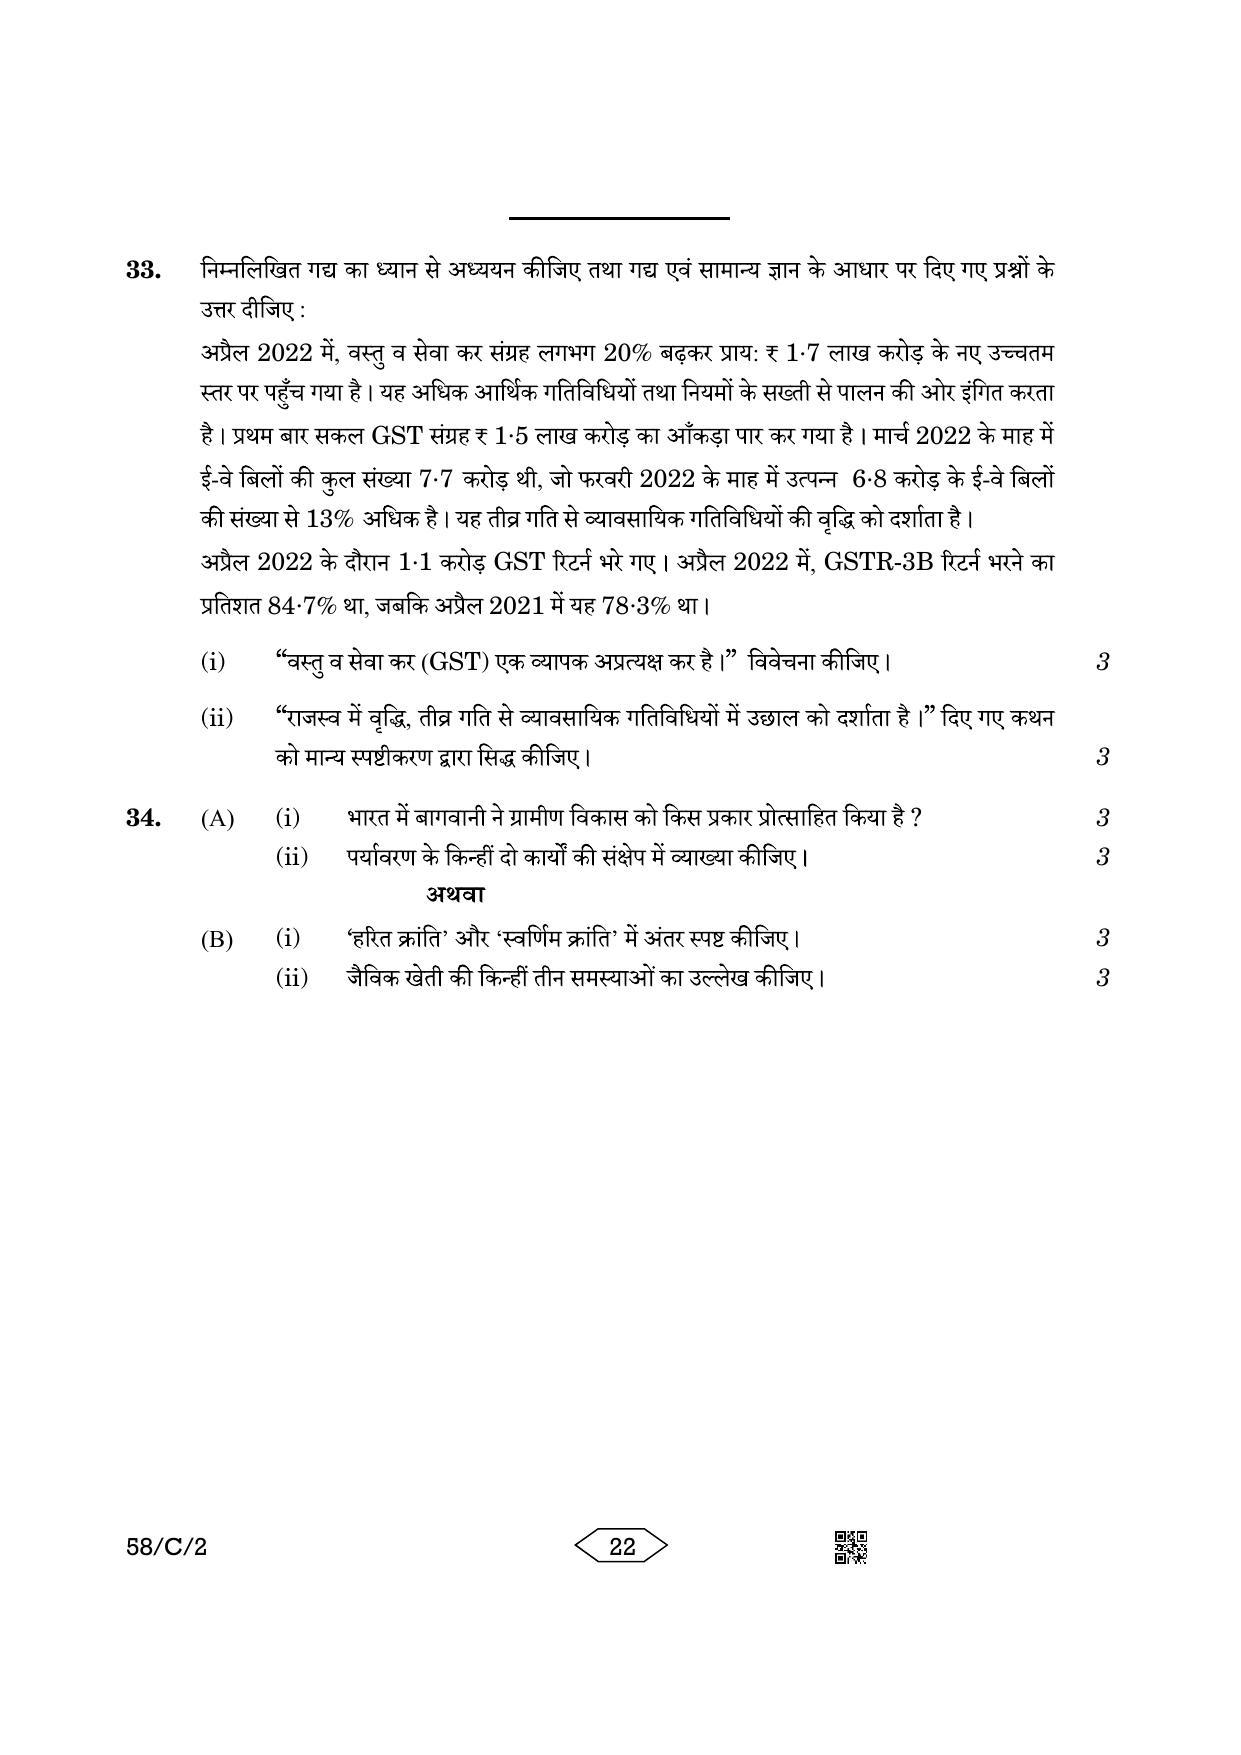 CBSE Class 12 58-2 Chemistry 2023 (Compartment) Question Paper - Page 22